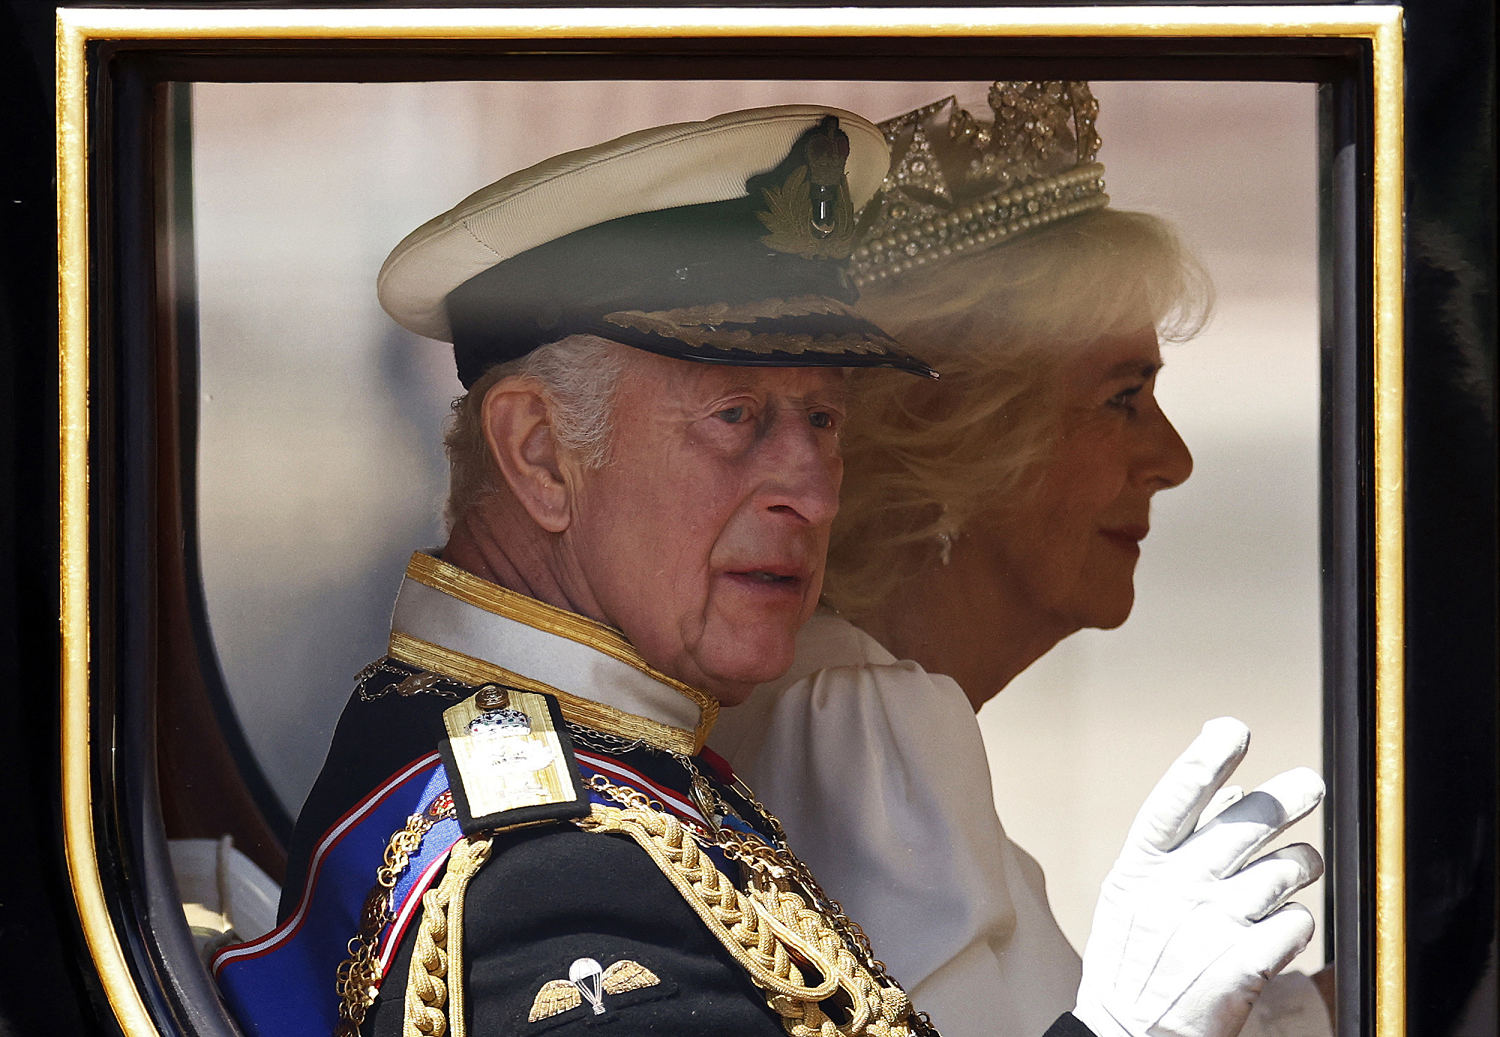 King Charles' monarchy gets a $60M pay rise as the U.K. grapples with a cost of living crisis